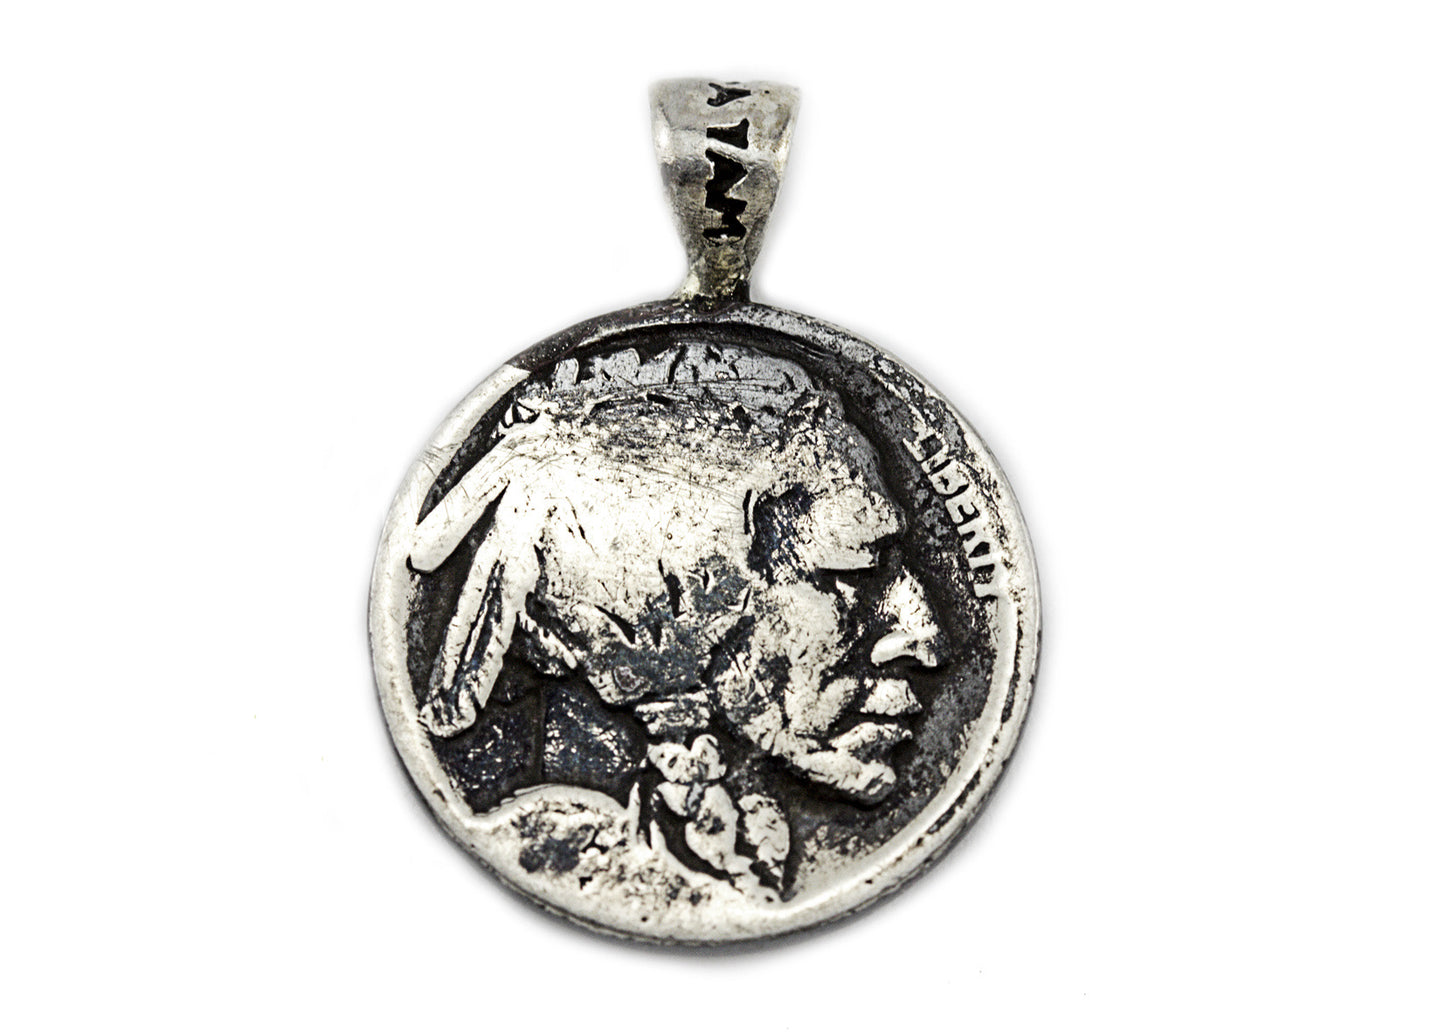 Coin Pendant with the Motorcycle coin medallion and the Buffalo Nickel coin of USA